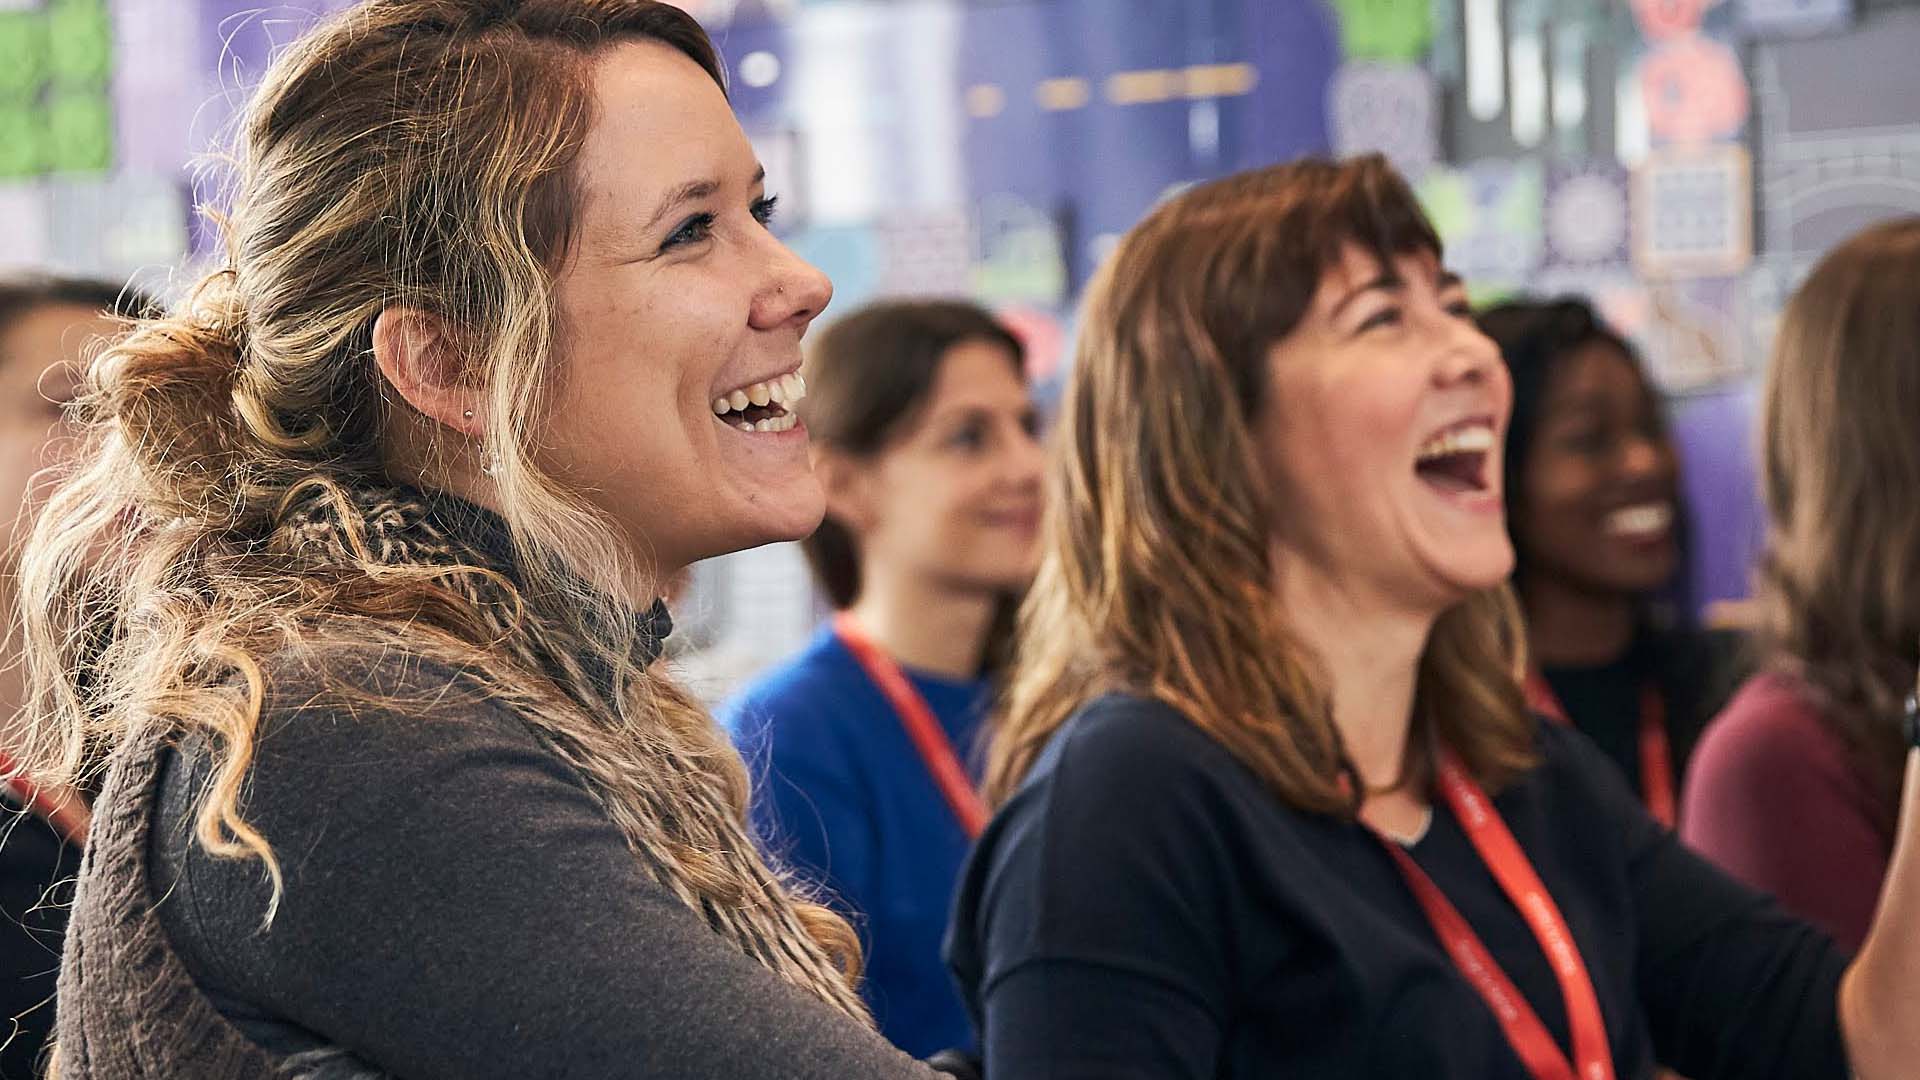 2 women in a conference, laughing